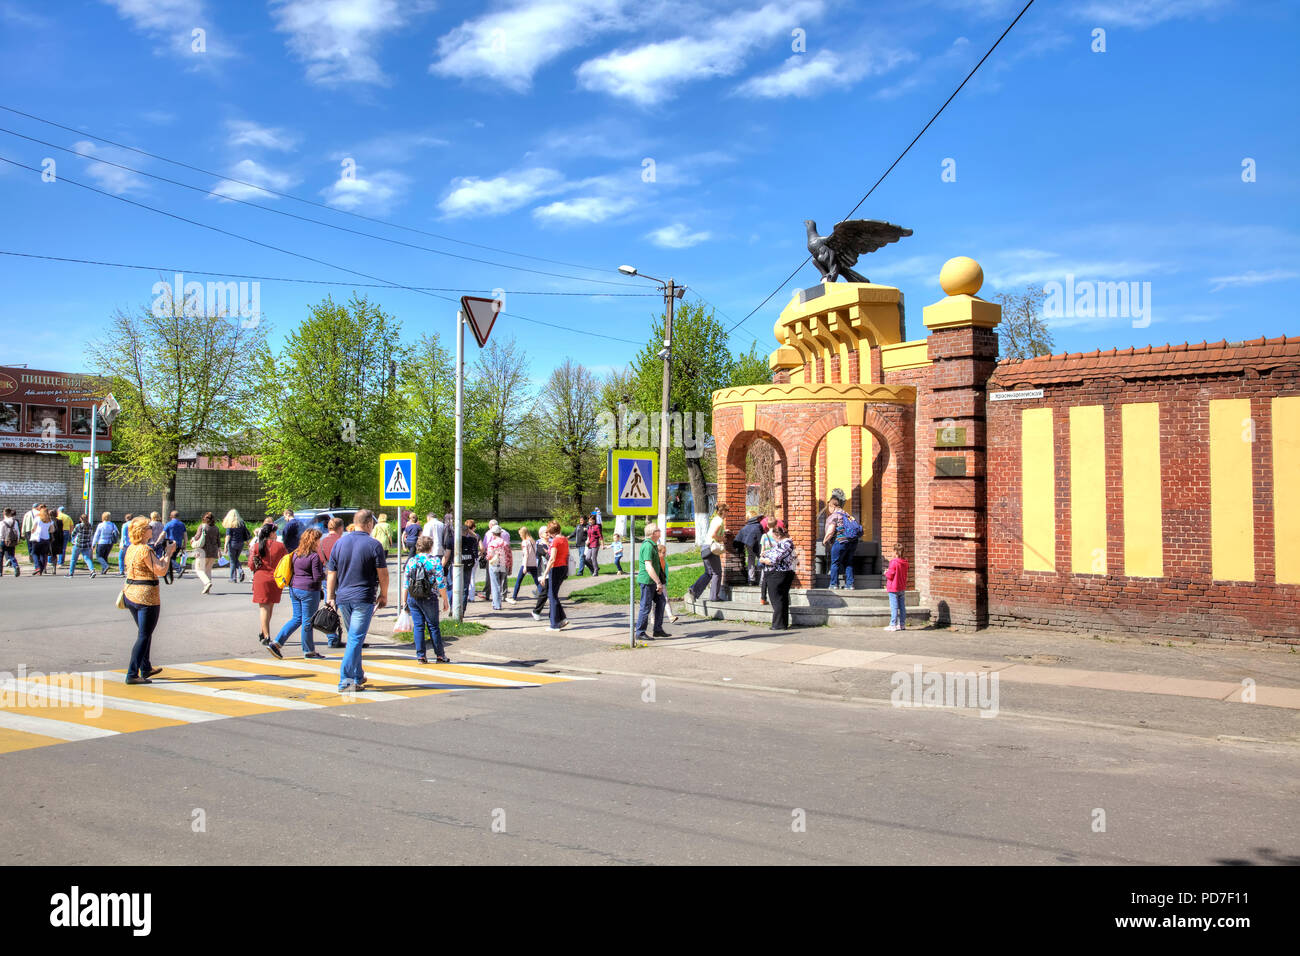 SOVETSK, RUSSIA - May 01.2018: The judge's fountain with the sculpture of an eagle and the mascaron of a lion. One of the sights of the city Stock Photo